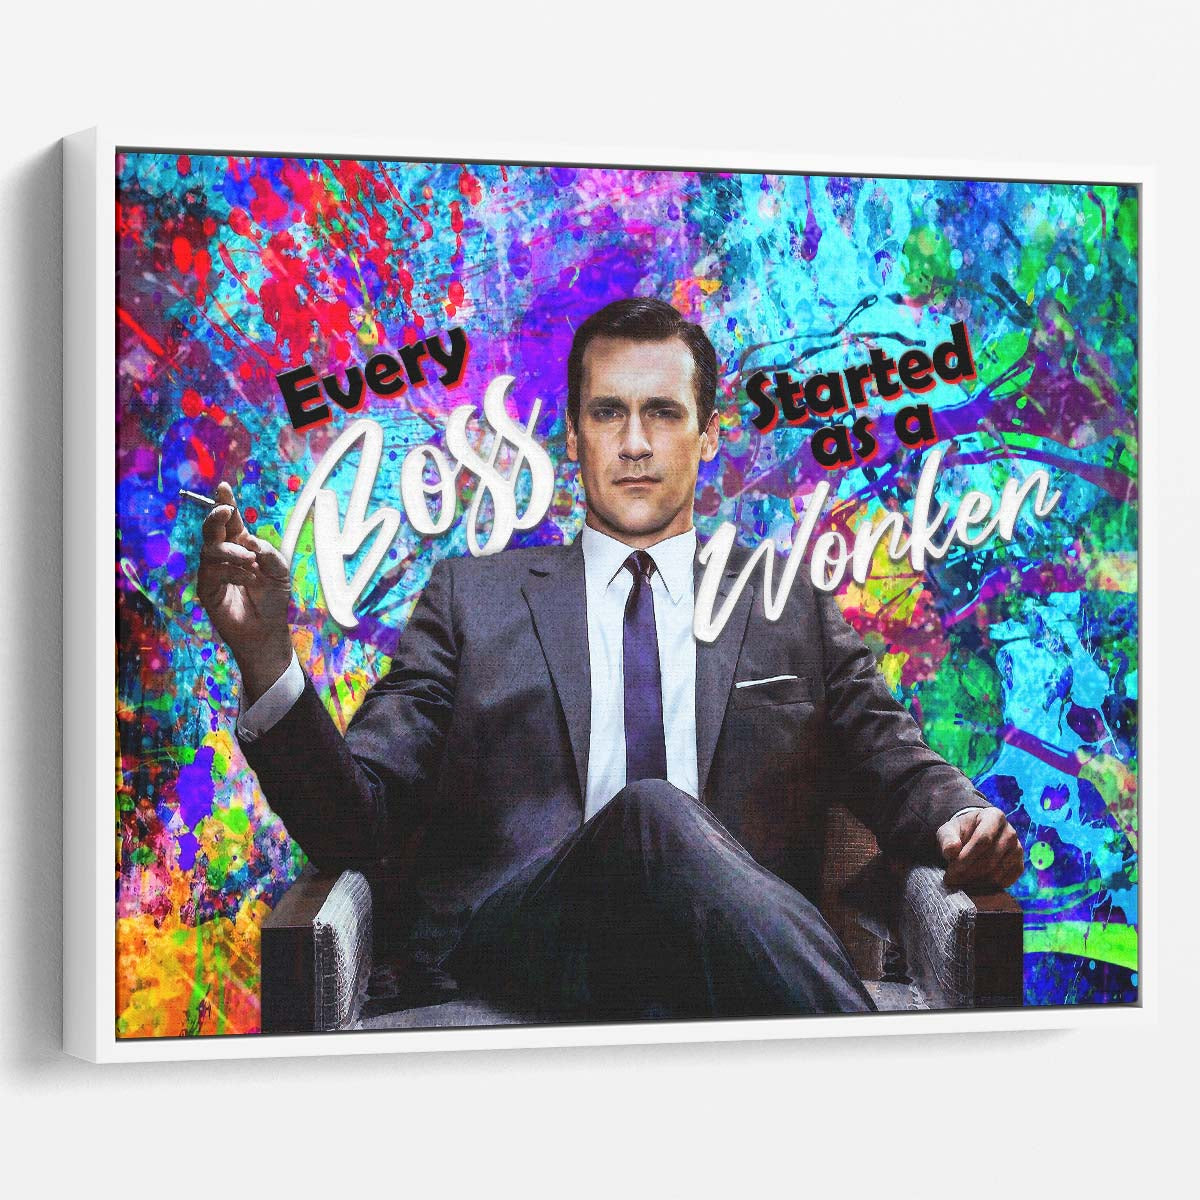 Every Boss Started As A Worker Wall Art by Luxuriance Designs. Made in USA.